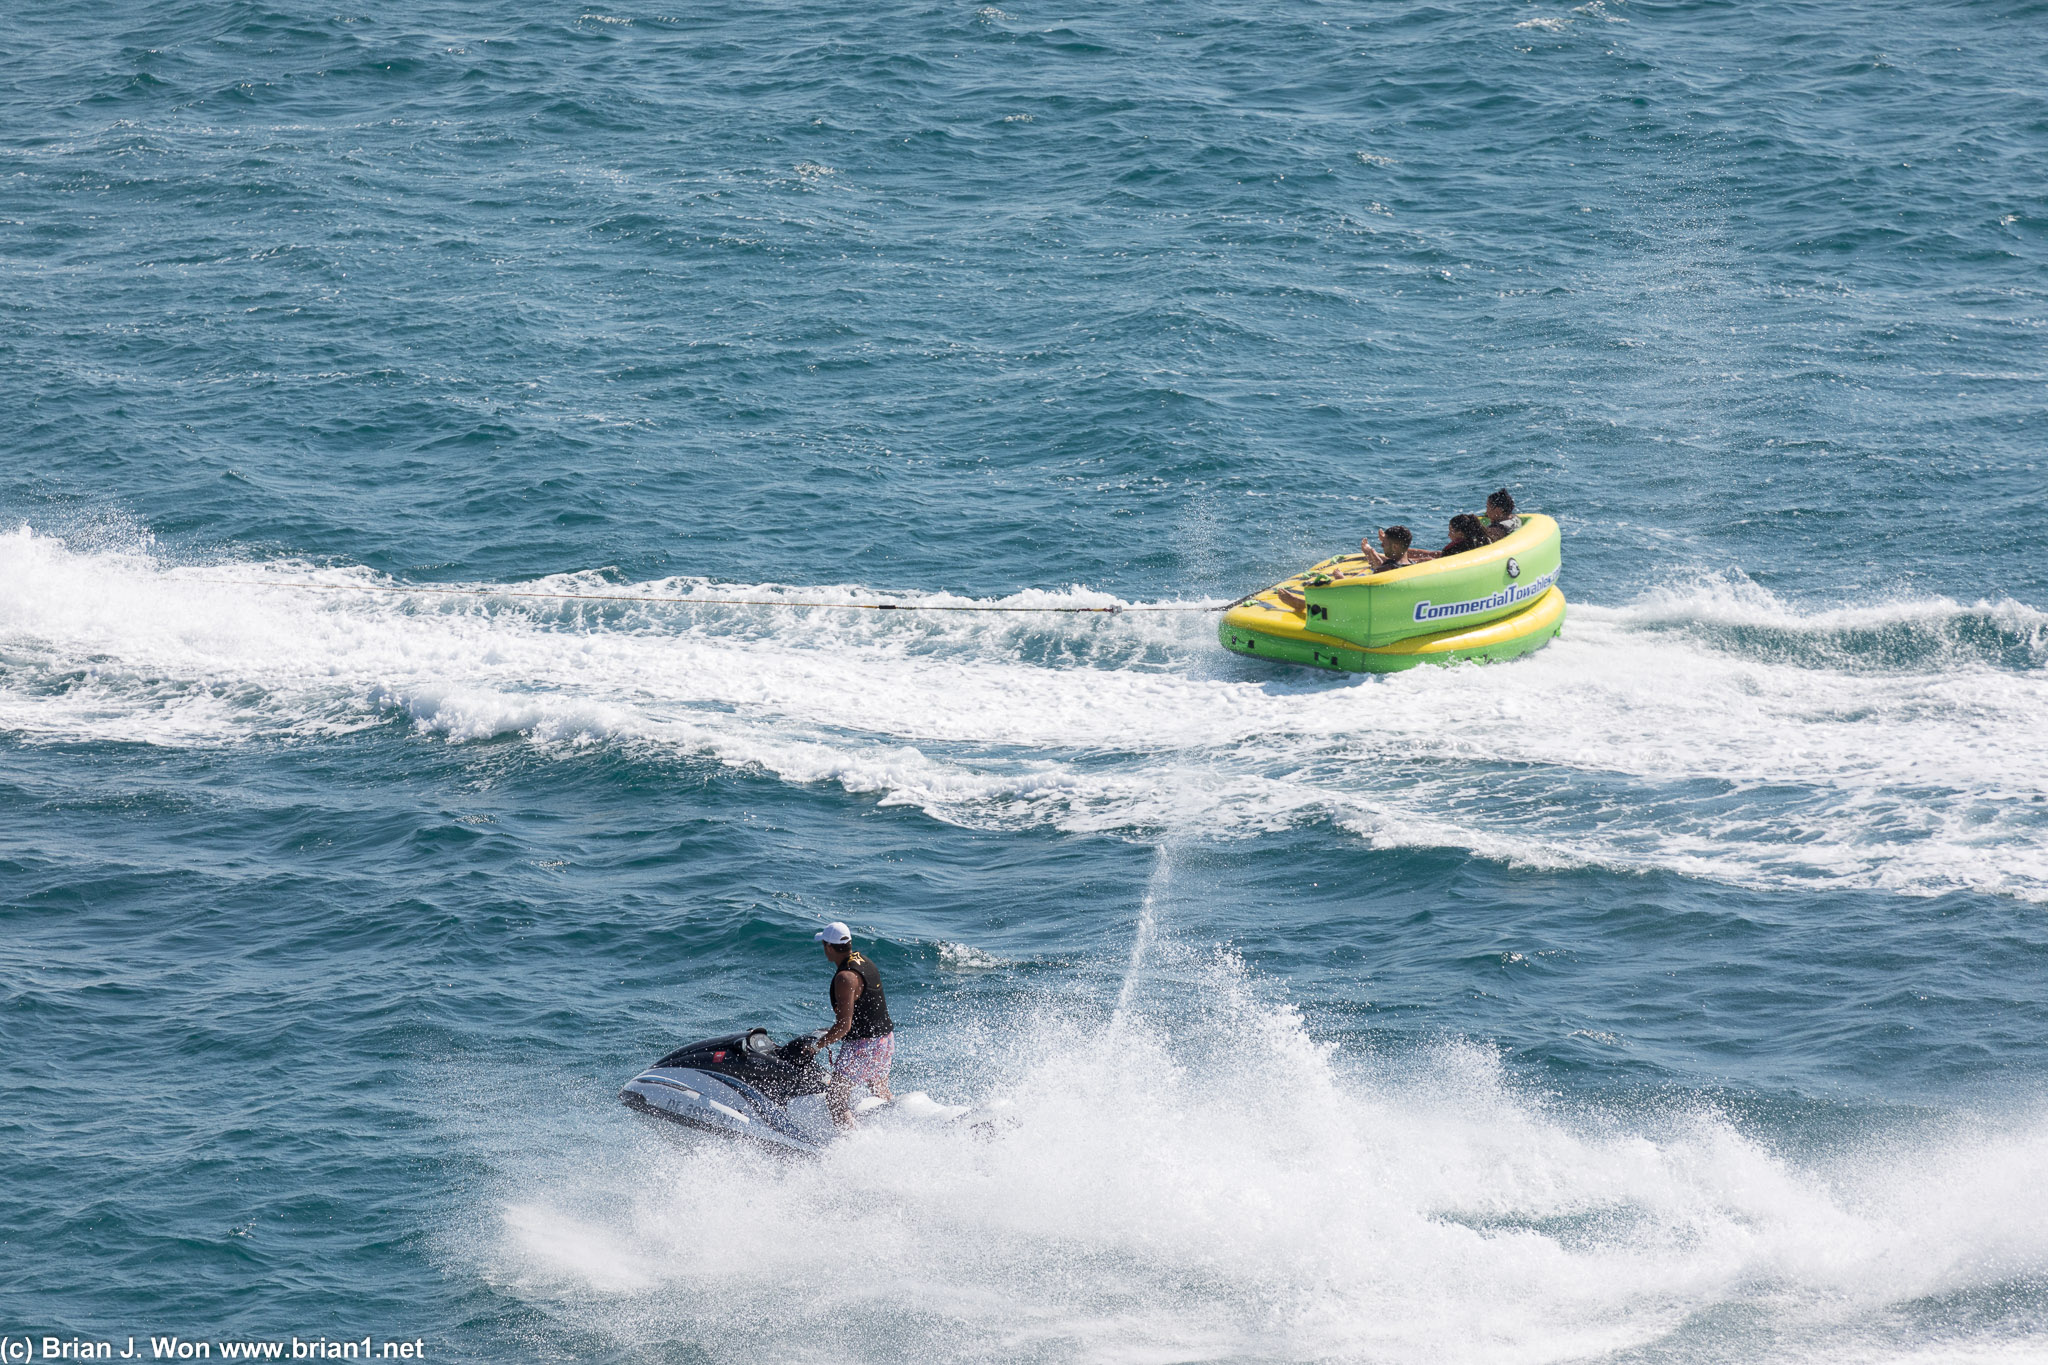 Inflatable rafts being pulled by jetski's.